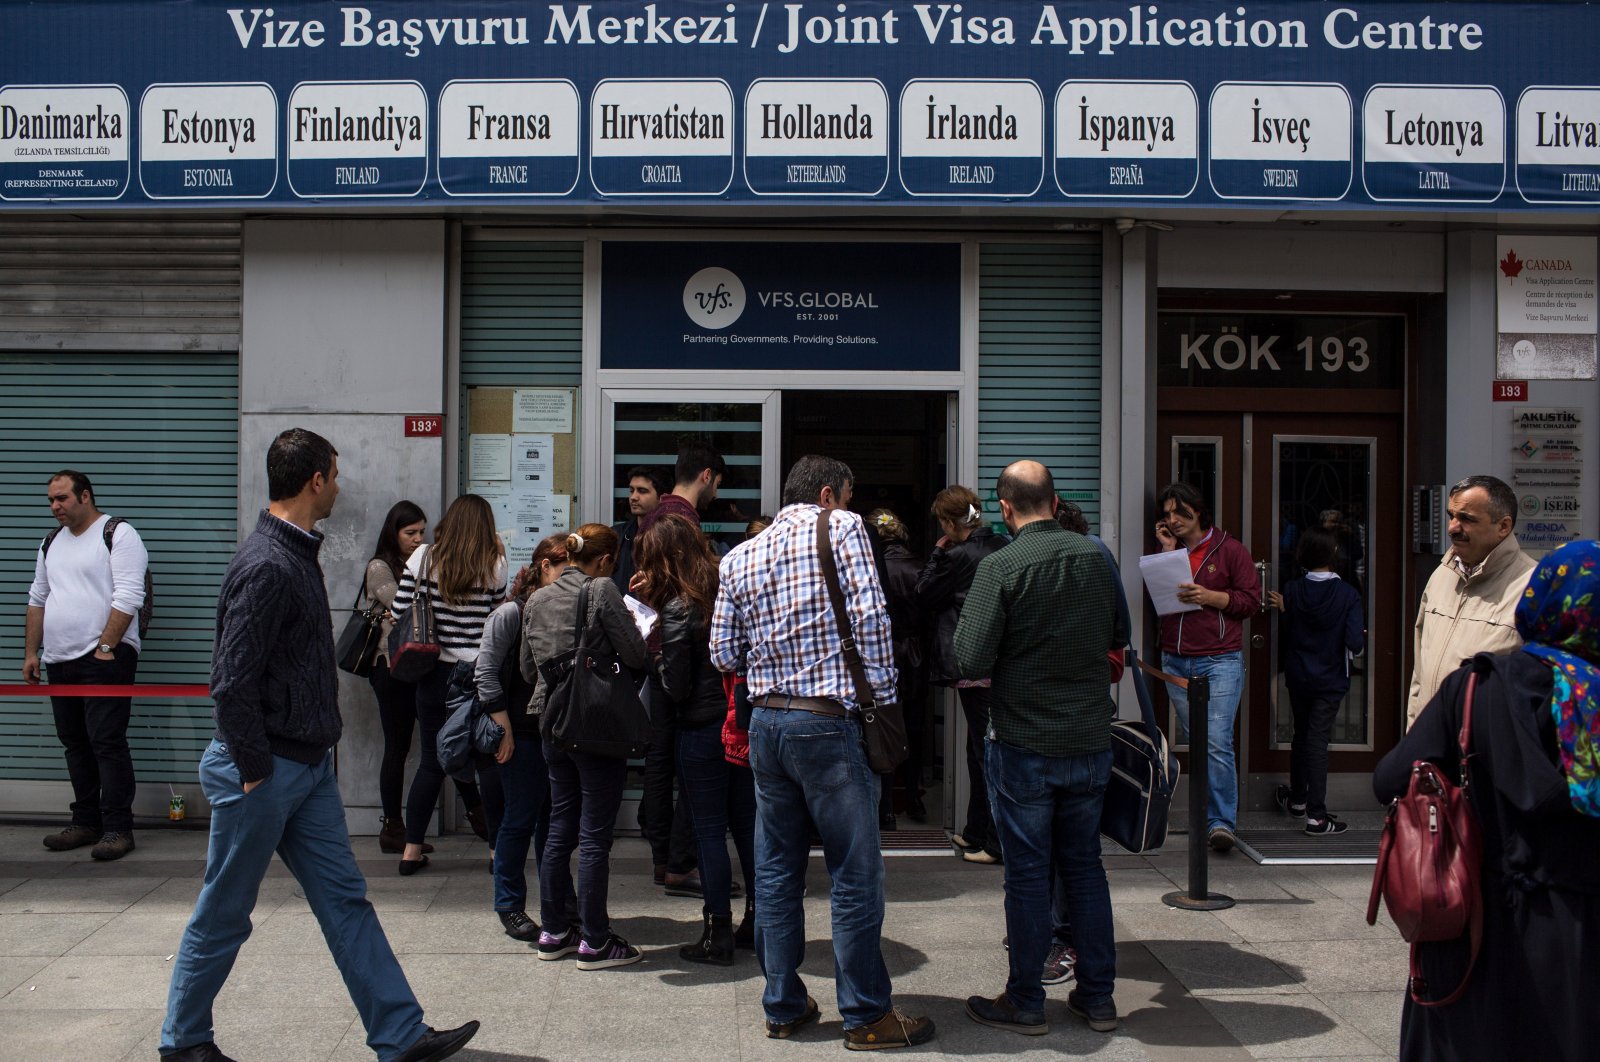 People wait outside a Joint Visa Application Center to apply for a Schengen visa, Istanbul, Türkiye, May 6, 2016. (Getty Images Photo)